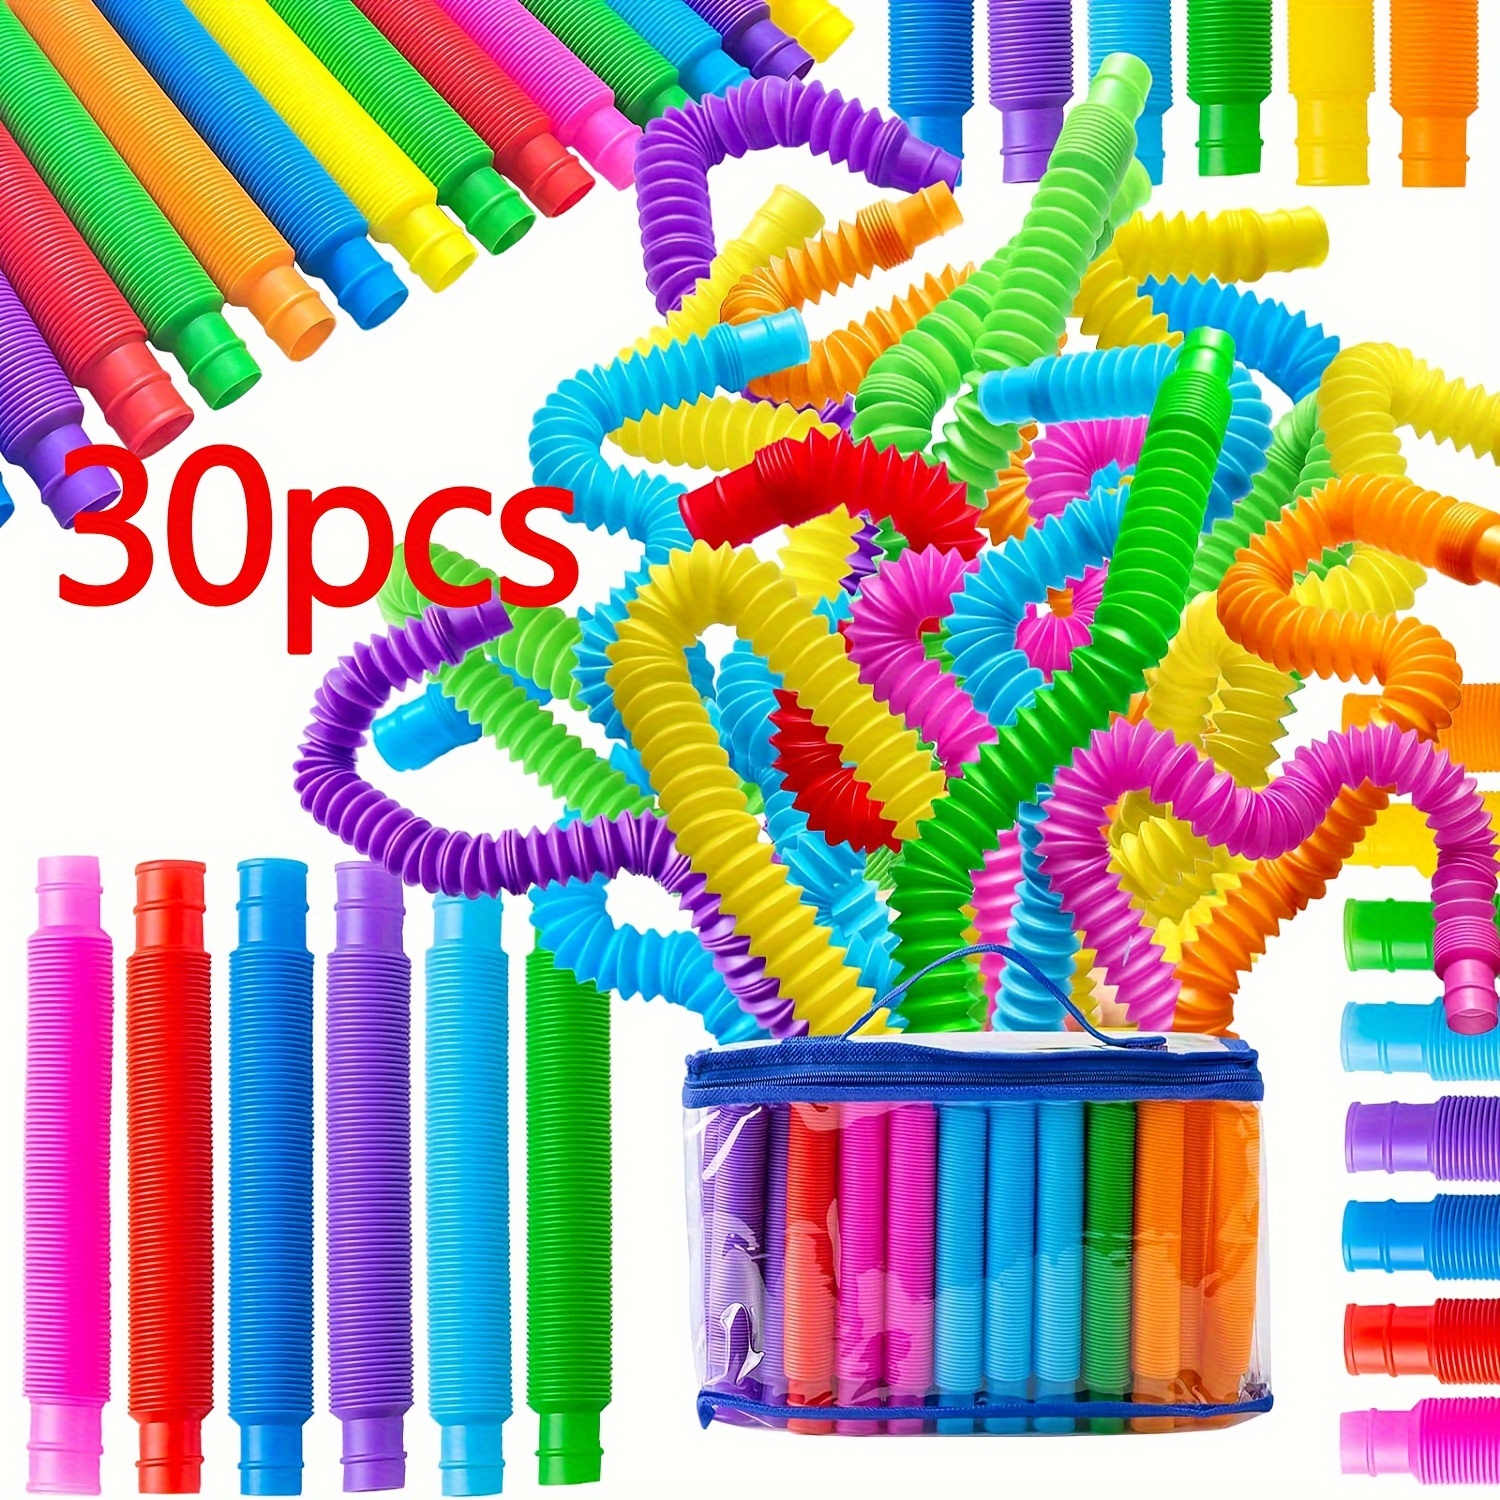 

30pcs Pop Tubes Bring Fun, Imagination, And Creative Learning To Children's Sensory Toy, Multiple Gameplay Methods For Halloween And Christmas Gift